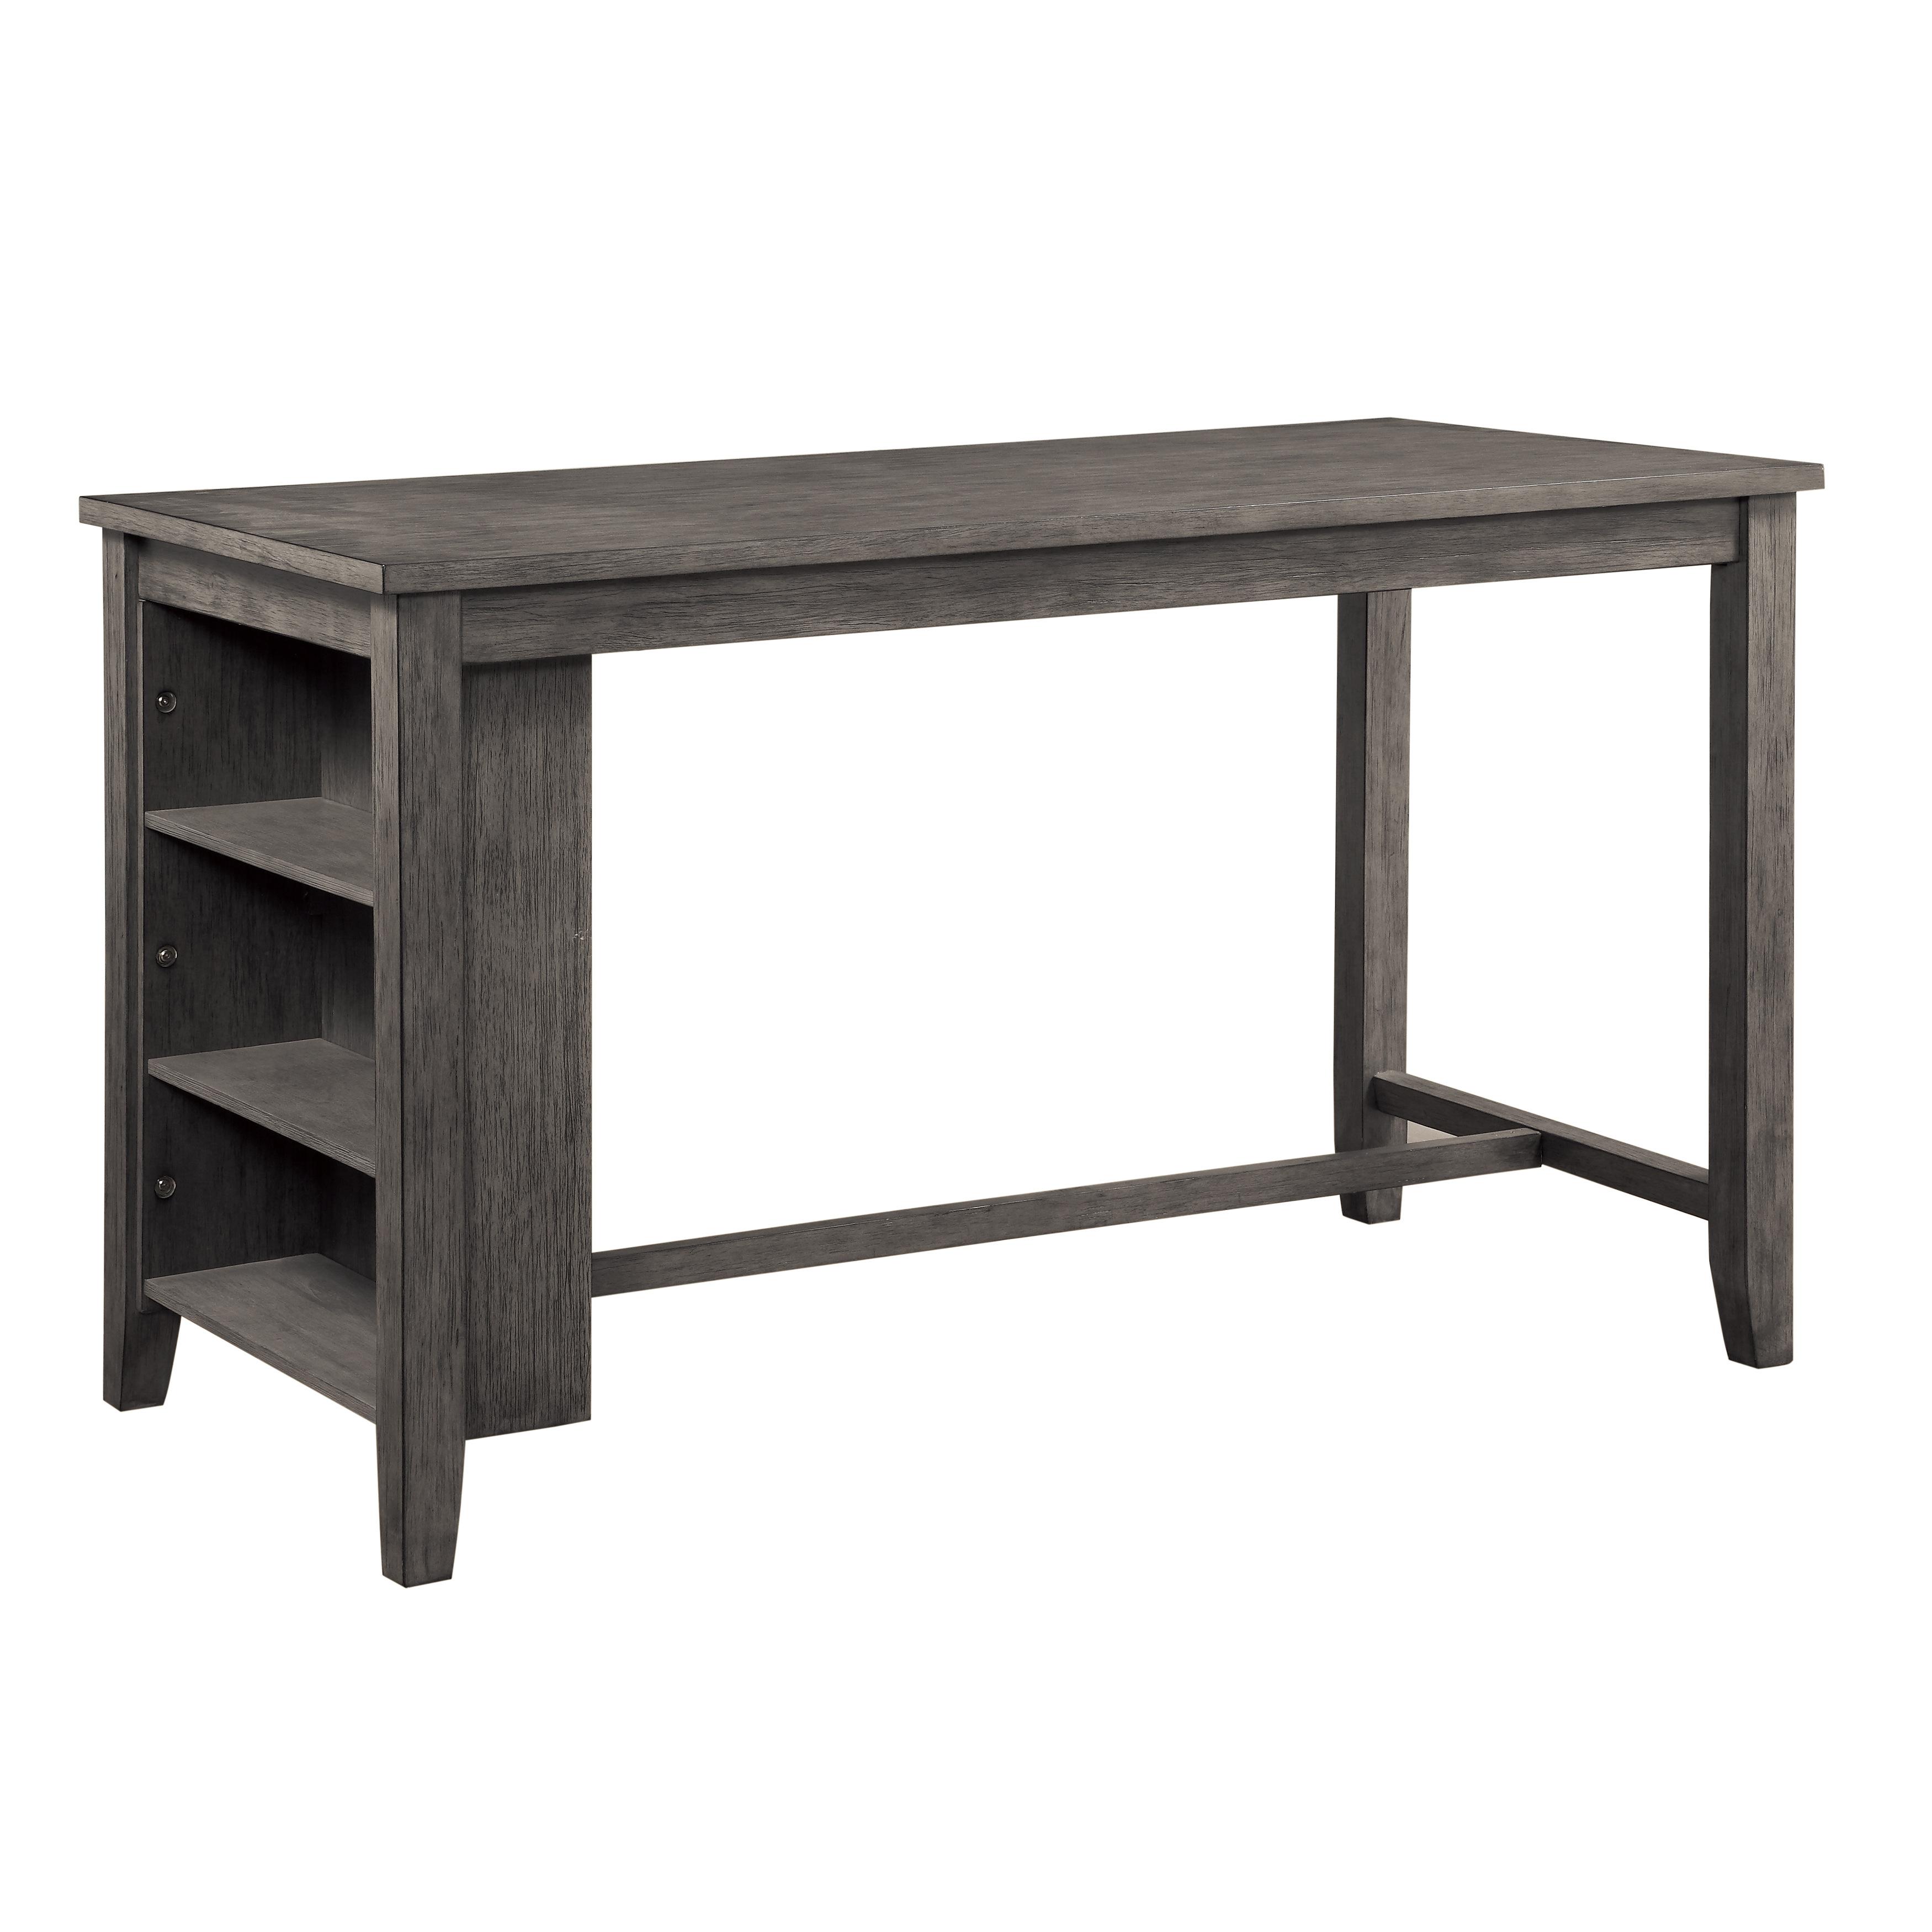 Transitional Counter Height Table 5603-36 Timbre 5603-36 in Gray 